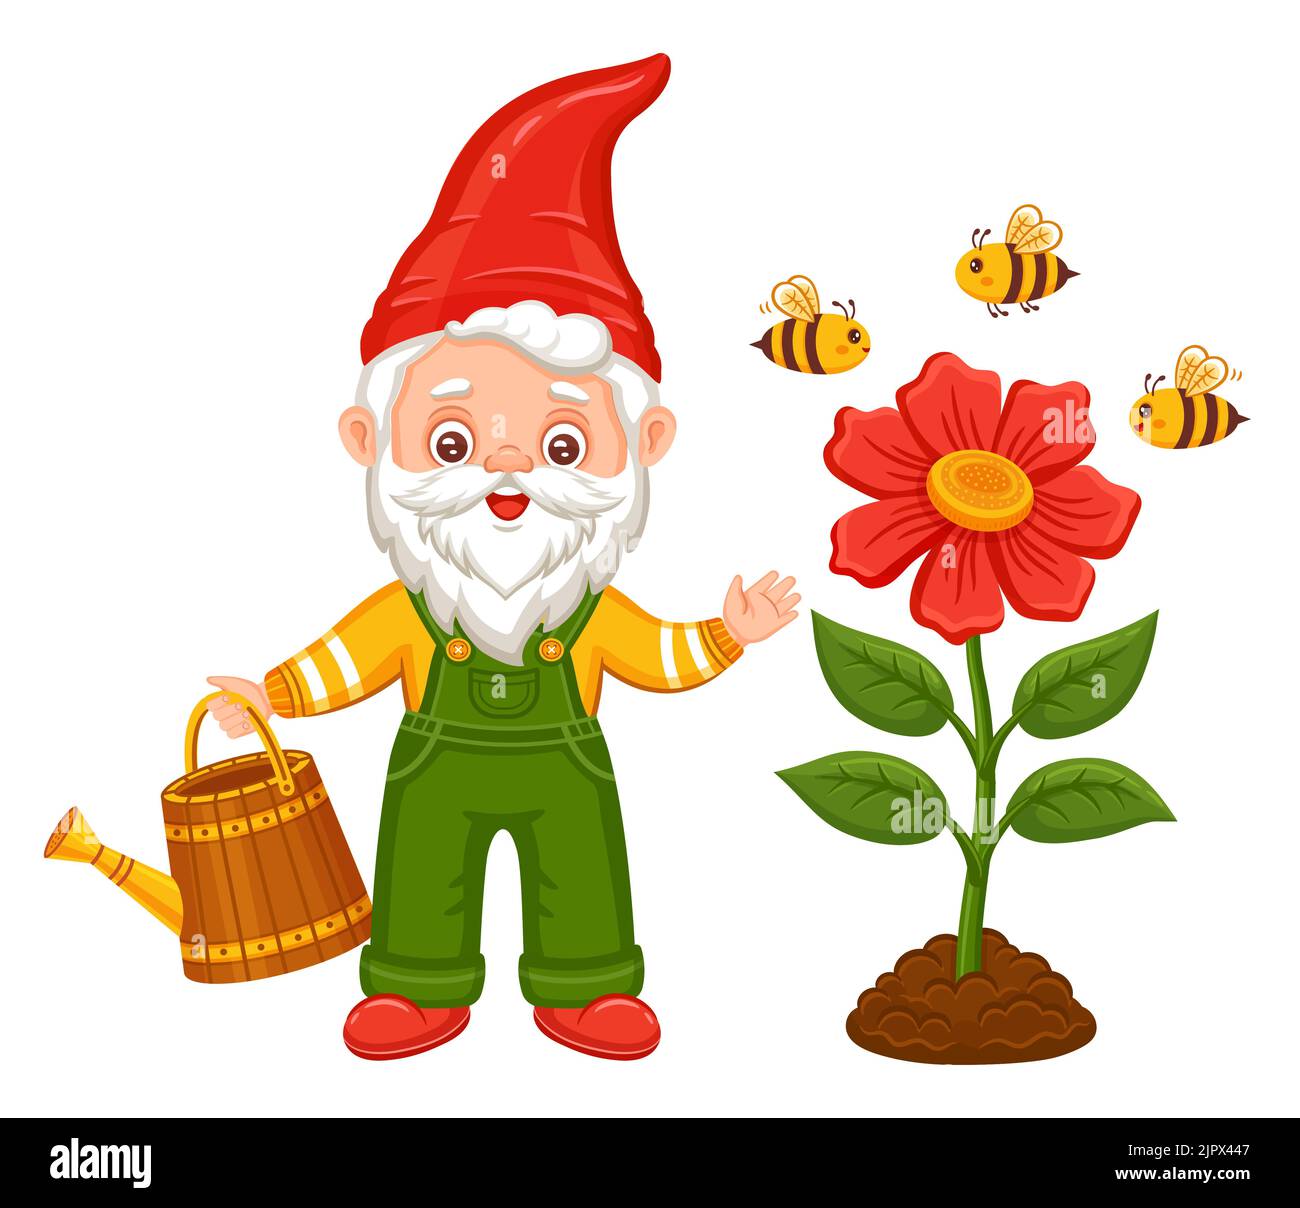 Cute garden gnome growing flower, gardener dwarf hold watering can. Fairytale gardening elf, small old man with beard. Bee collect honey nectar vector Stock Vector